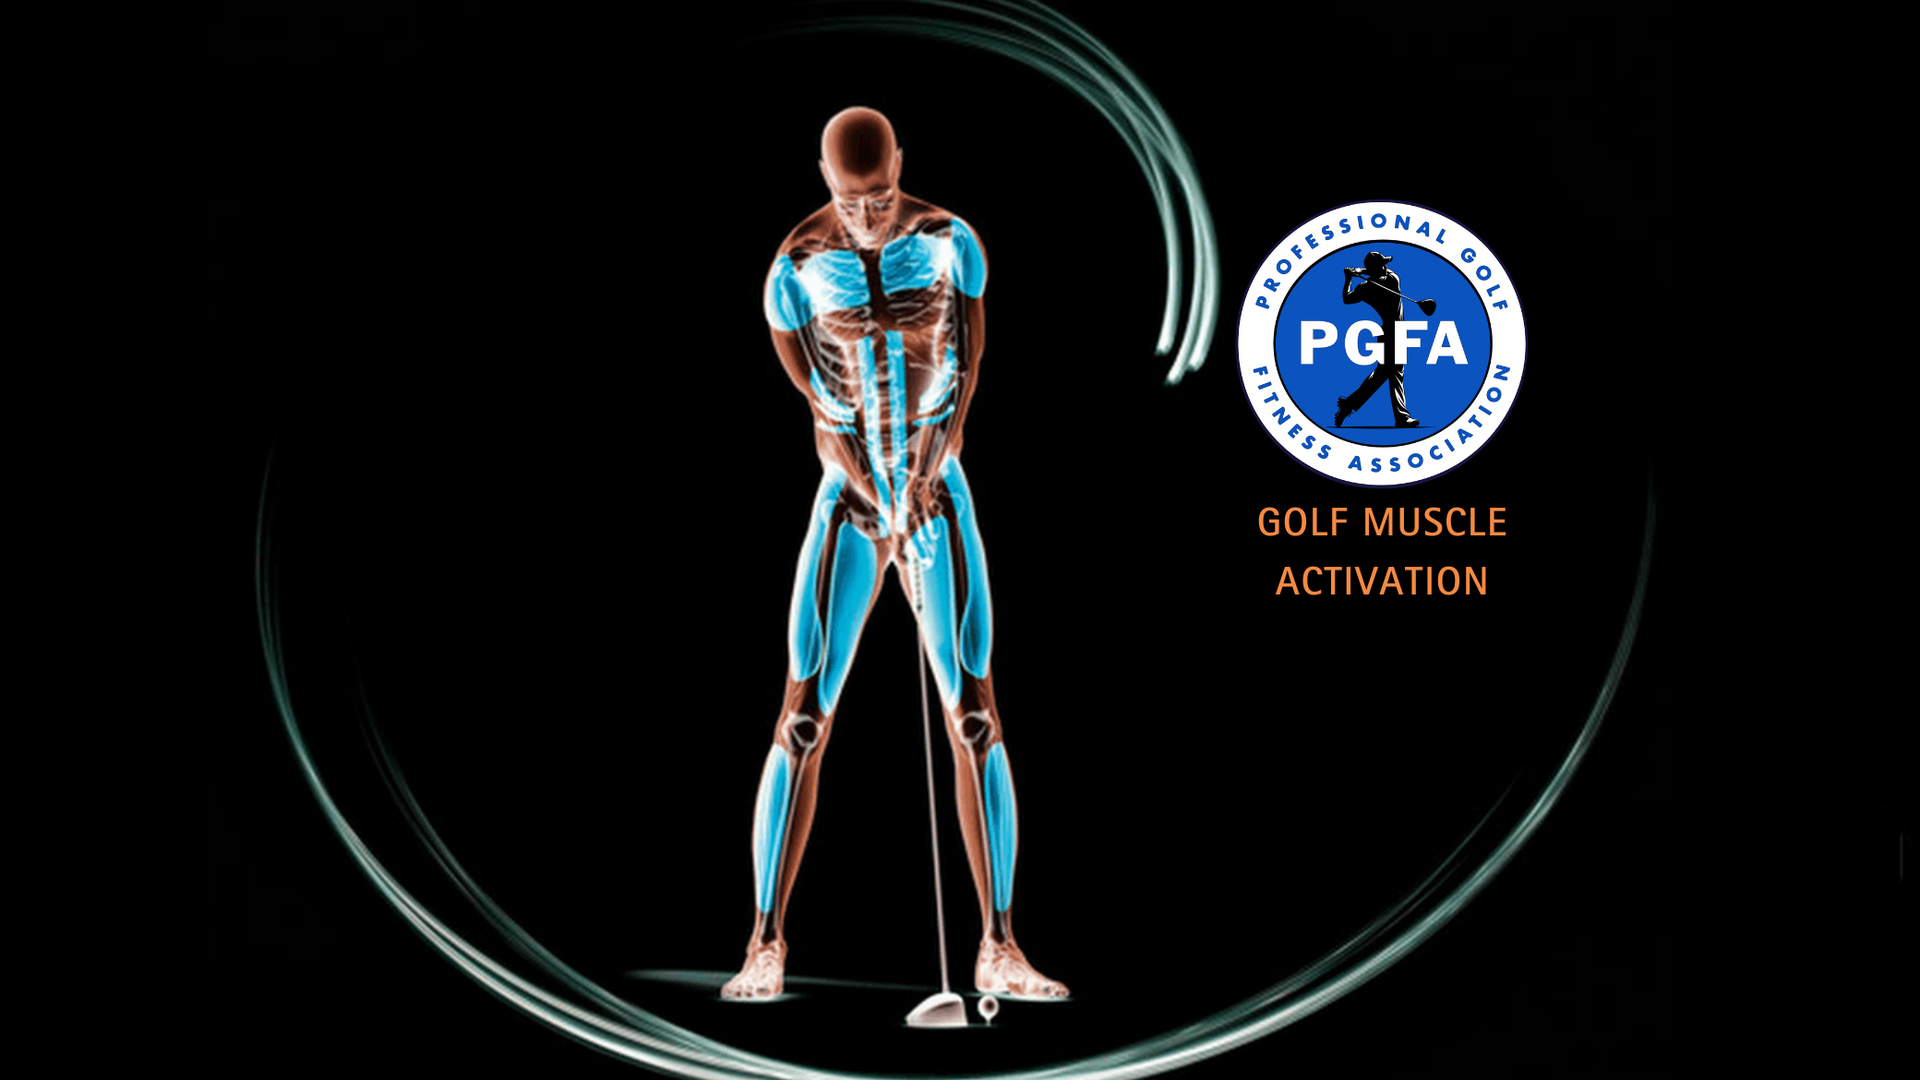 PGFA Golf Muscle Activation 